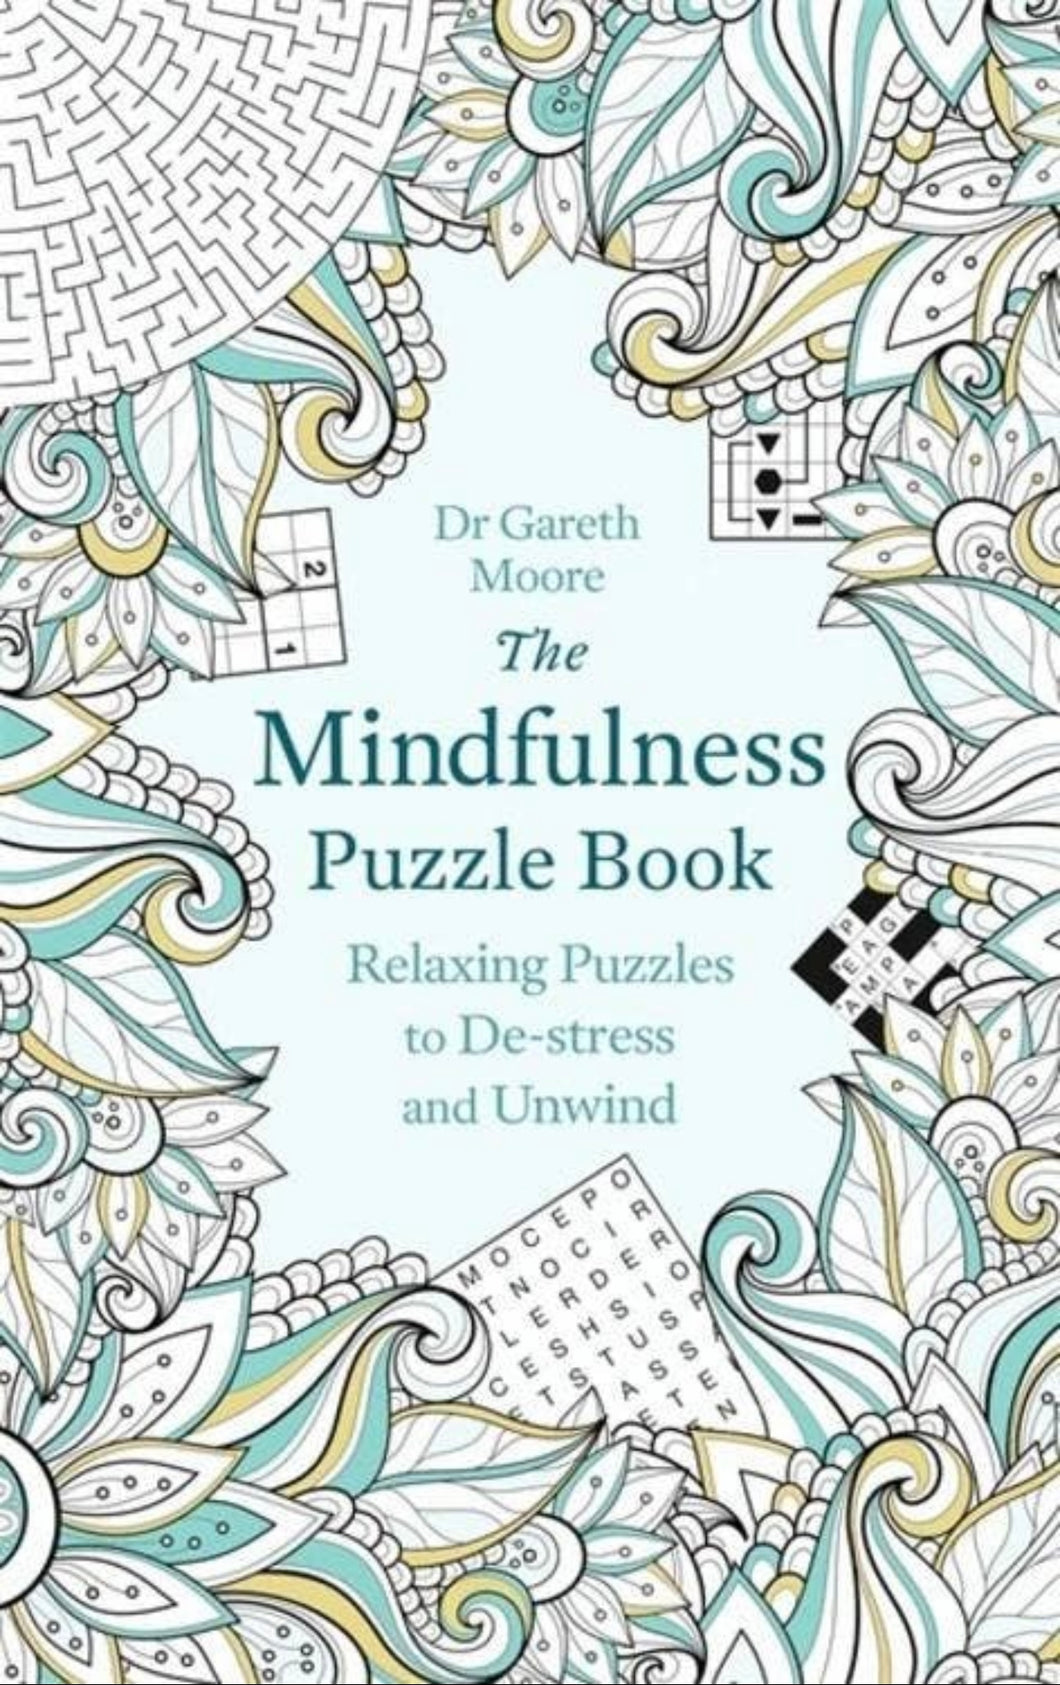 Mindfulness Puzzle Book: Relaxing Puzzles to De-Stress